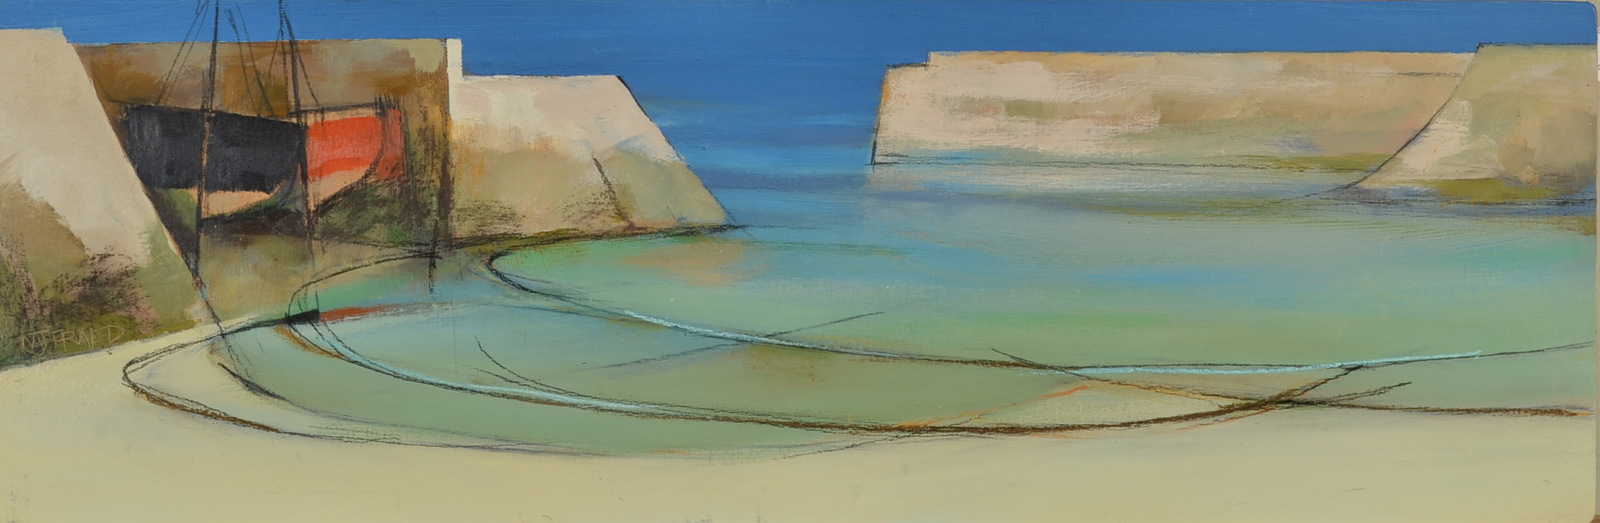 MICHAEL PRAED
Incoming Tide
Oil on board
Signed, dated 2004-5 and inscribed to the back
20 x 61cm,